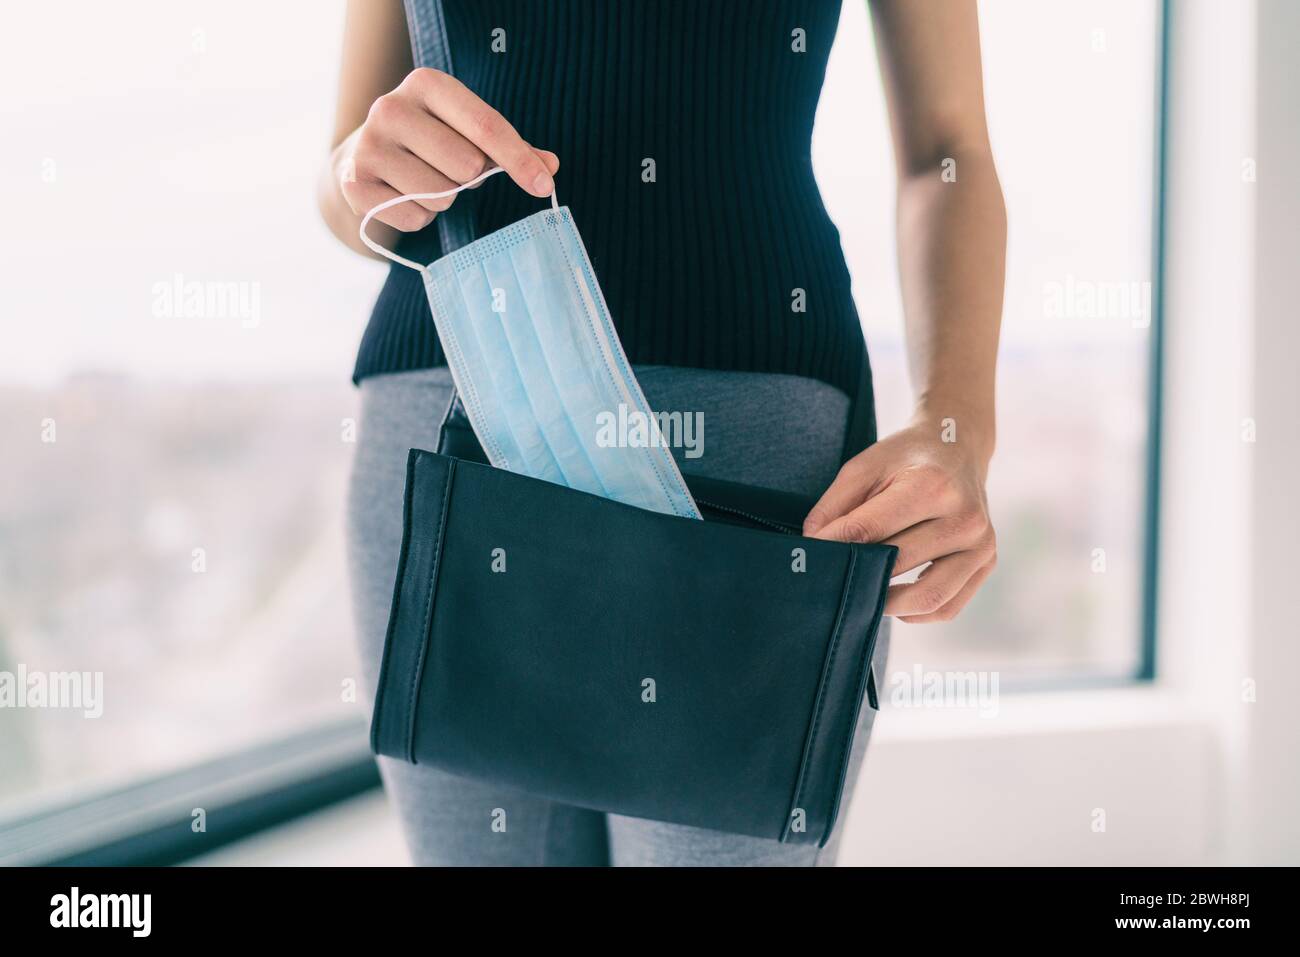 COVID-19 Prevention woman bringing medical mask in her purse for walking outside doing errands in public spaces and store. Coronavirus face masks protection obligatory wear to work. Stock Photo